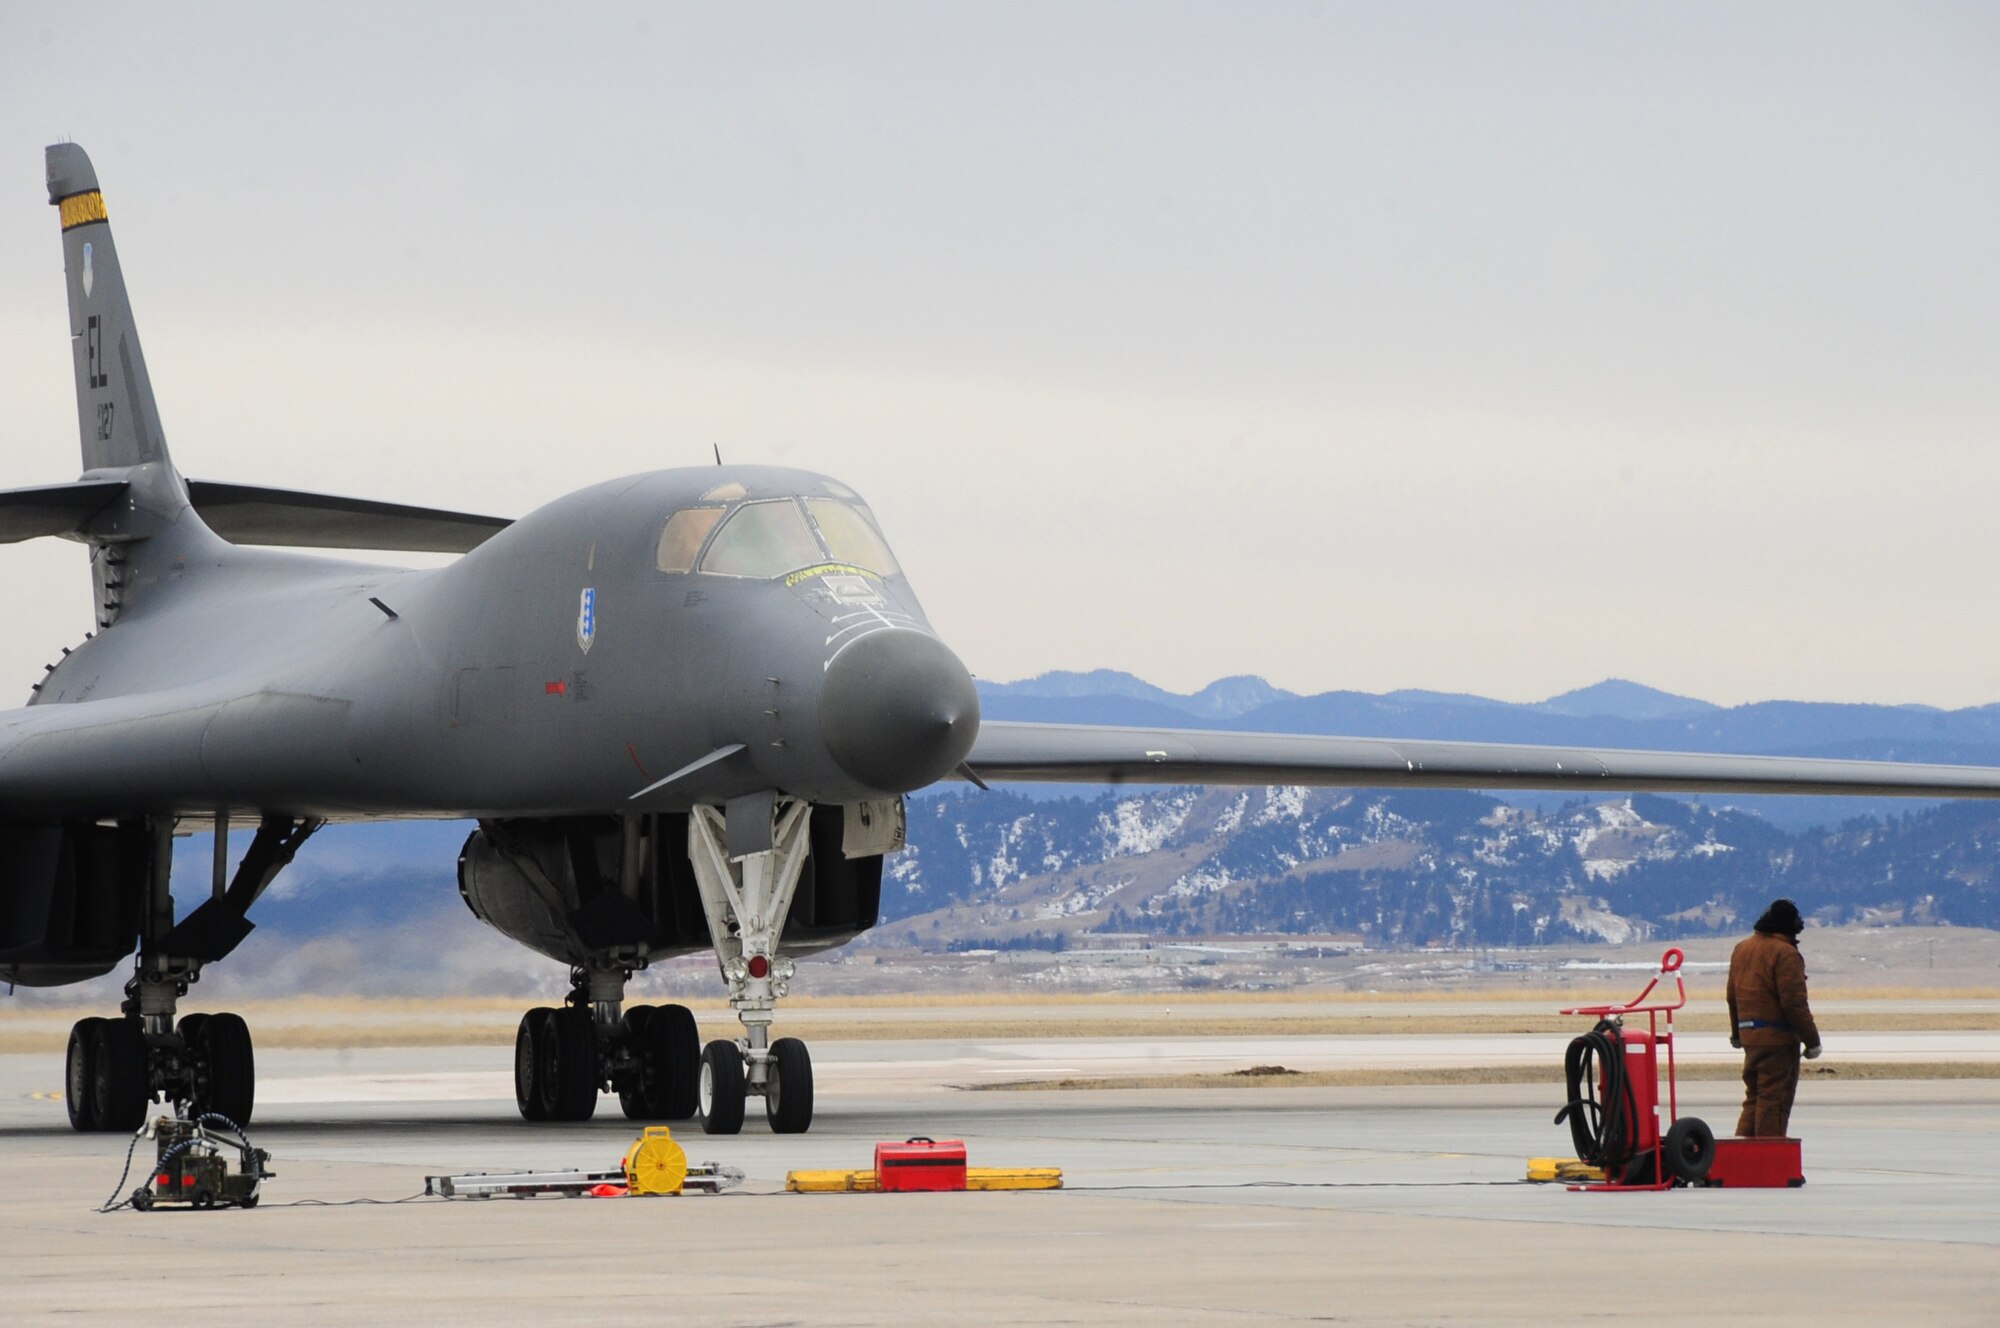 ELLSWORTH AIR FORCE BASE, S.D. -- A B-1B Lancer from the 37th Bomb Squadron returns home after completing a six-month deployment in Southwest Asia, Jan. 26.  The B-1 can rapidly deliver massive quantities of precision and non-precision weapons against any adversary, anywhere in the world, at any time. (U.S. Air Force photo/Airman 1st Class Anthony Sanchelli)

